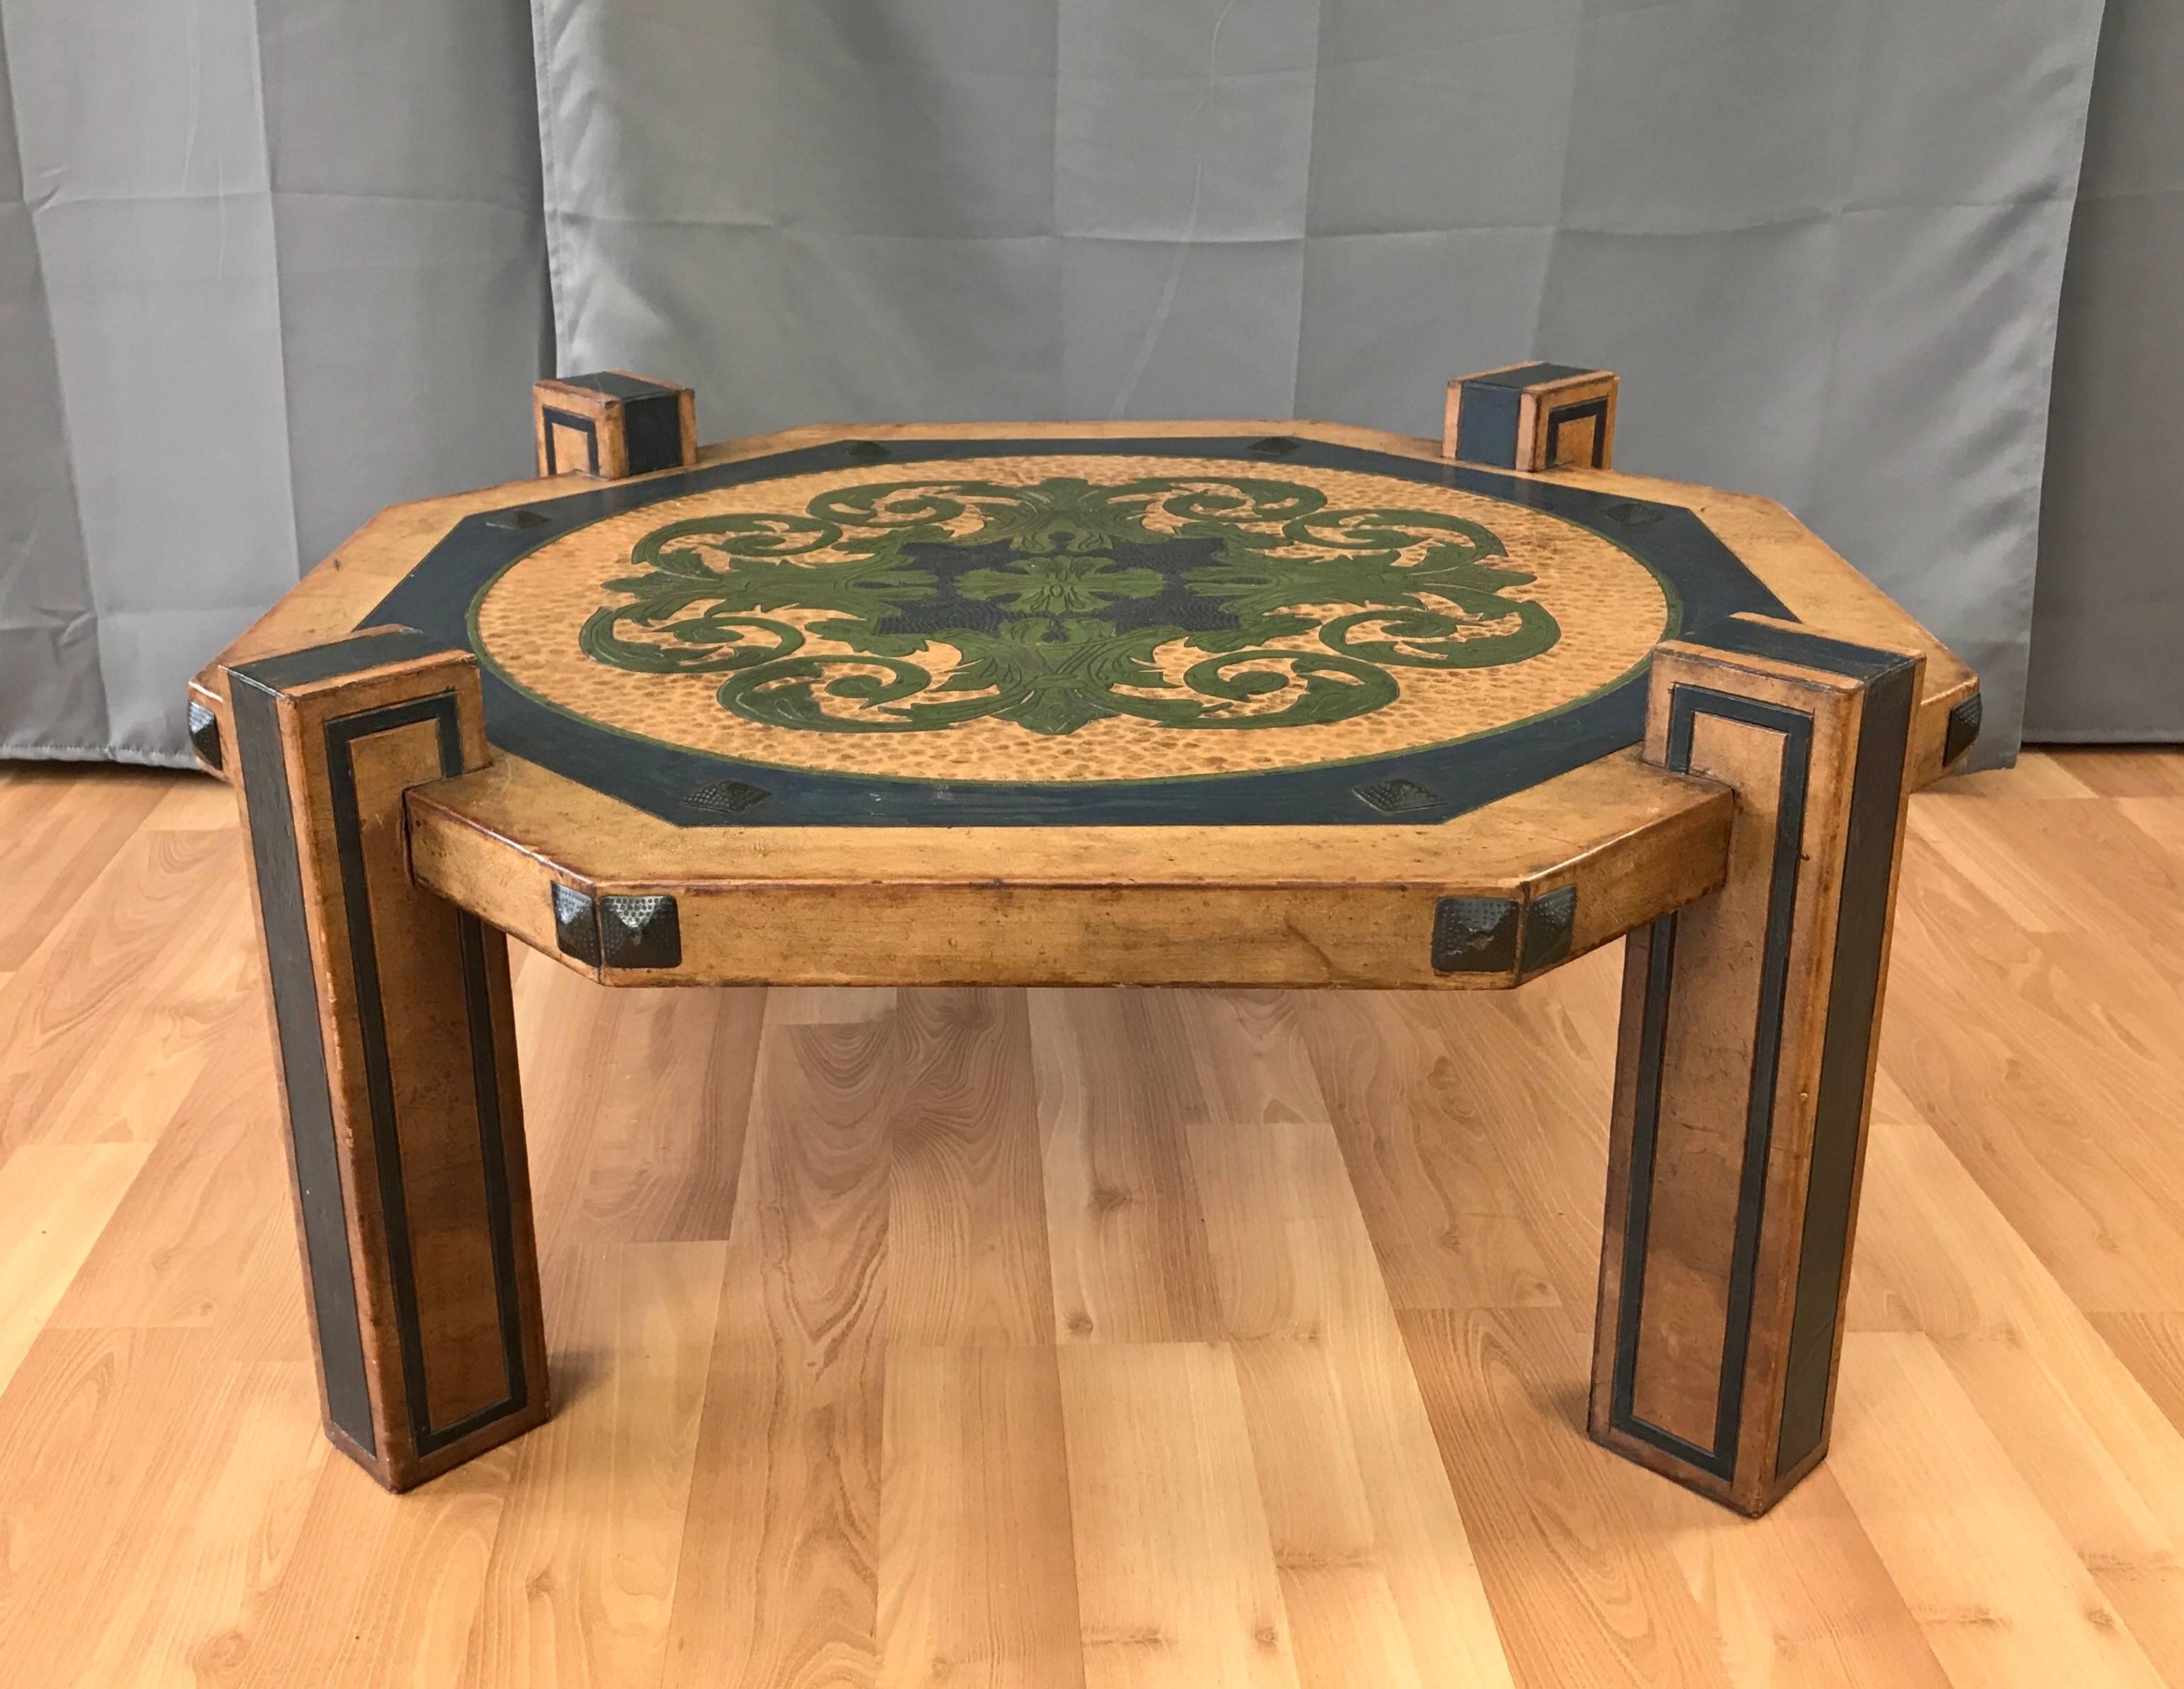 An impressive, circa 1970s Arts & Crafts-style leather clad octagonal coffee table done in the manner of Maitland-Smith.

Fully finished in exactingly applied hand-tooled, colored, and antiqued leather. Regally executed medallion depicting